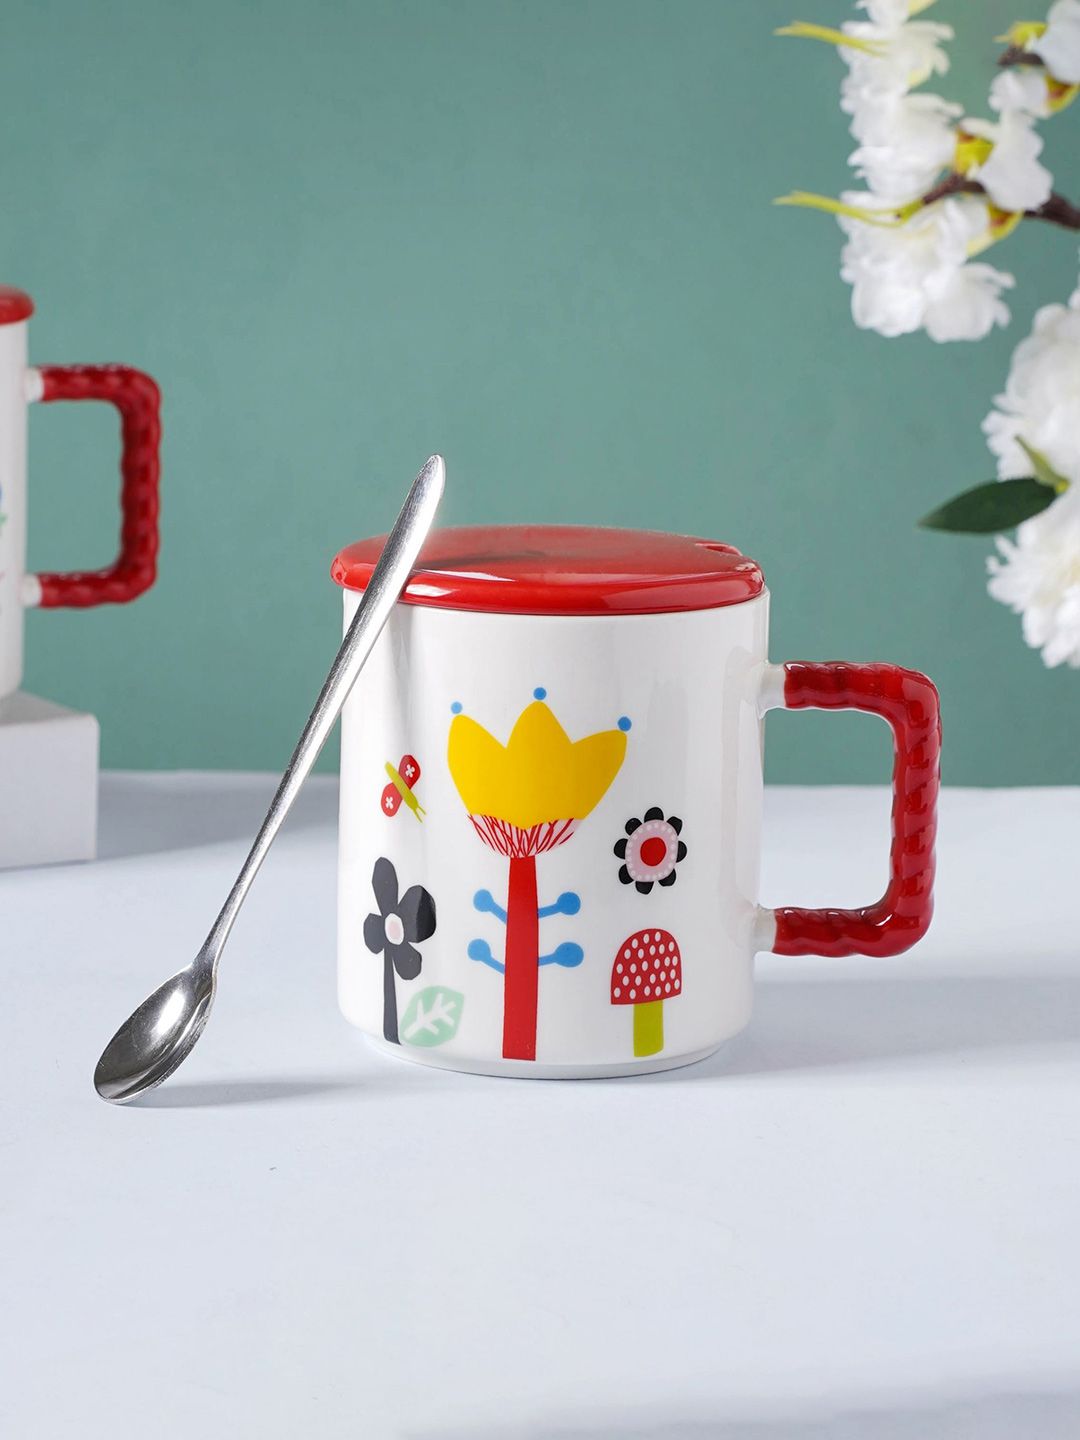 Nestasia White & Red Floral Printed Ceramic Mug with Lid & Spoon Price in India